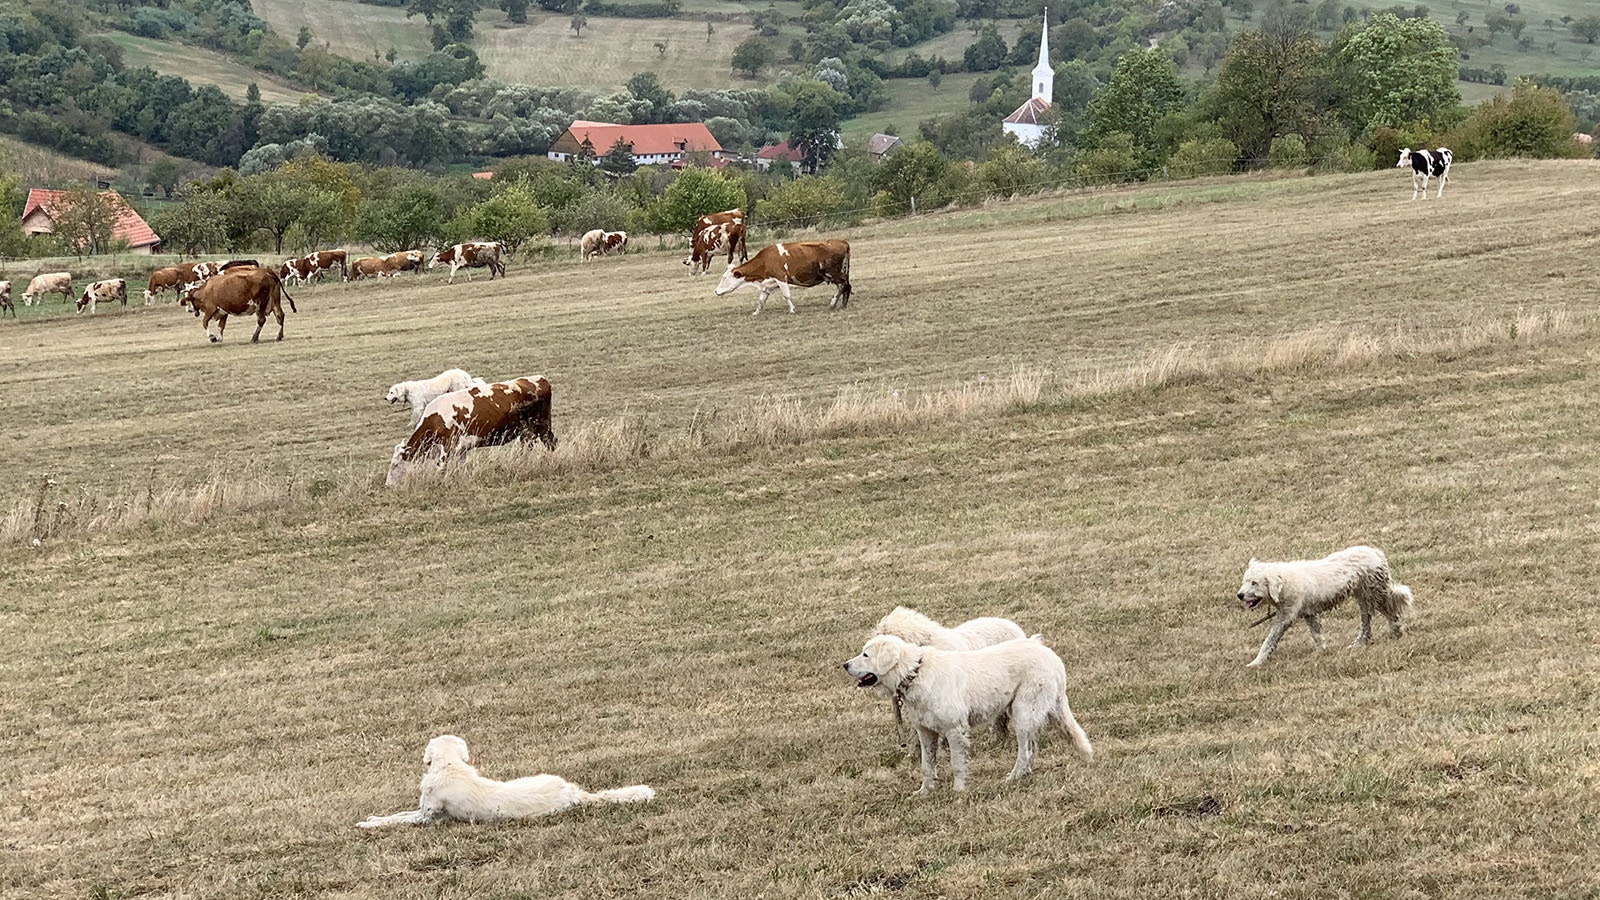 Livestock guardian dogs keep watch over cattle in Transylvania, protecting the cows from bears and wolves.